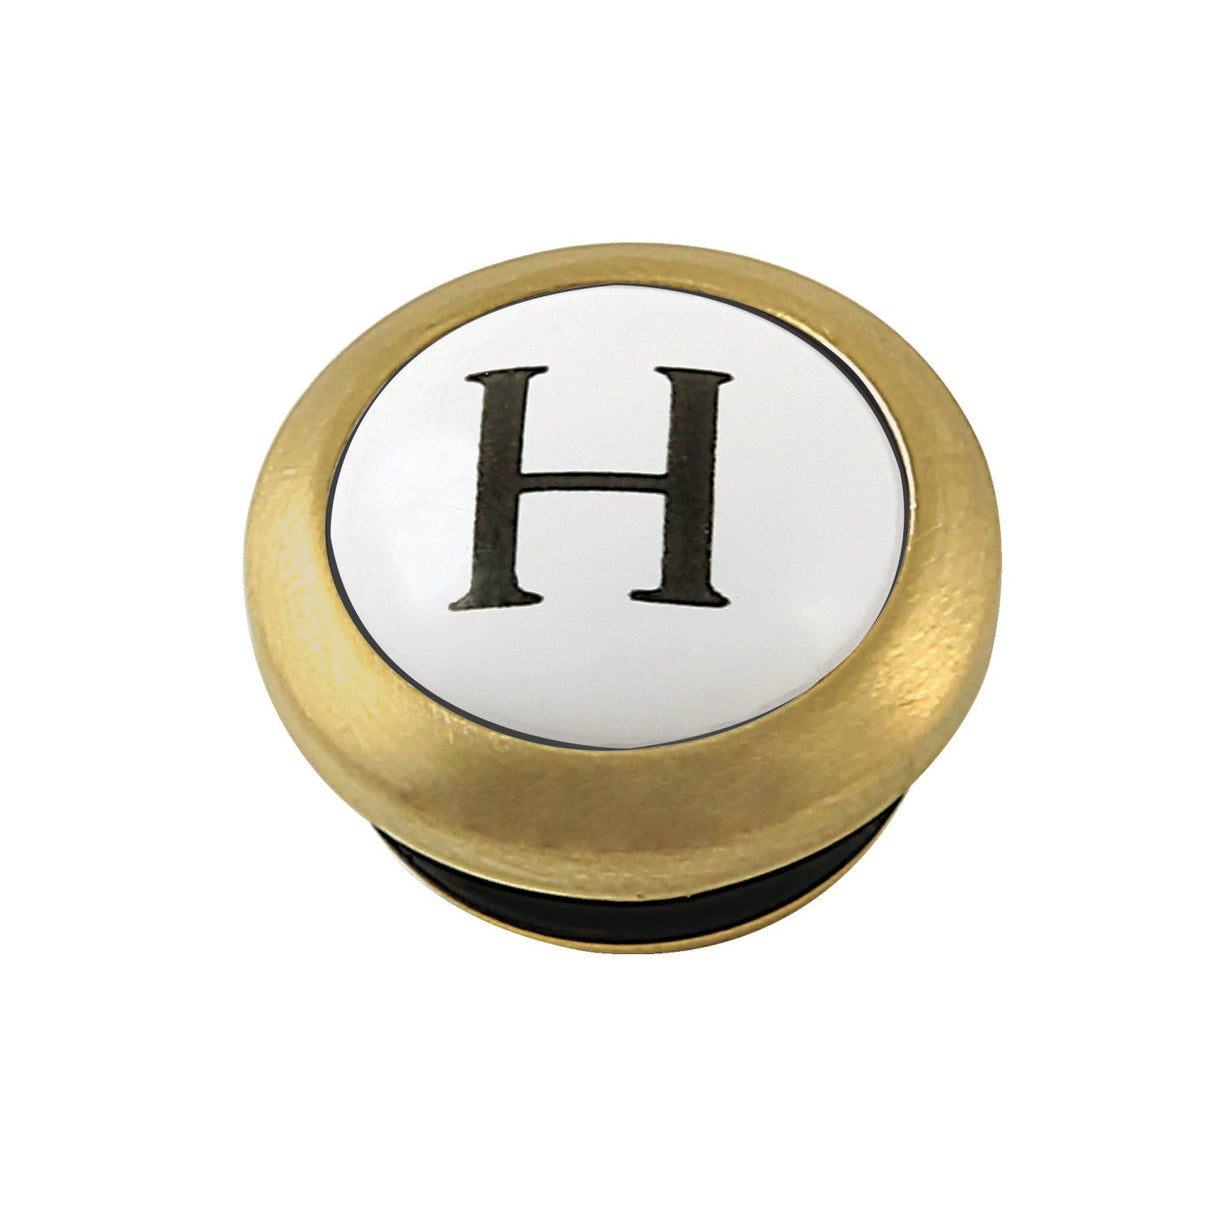 CCHIMX7CSH Hot Handle Index Button, Brushed Brass